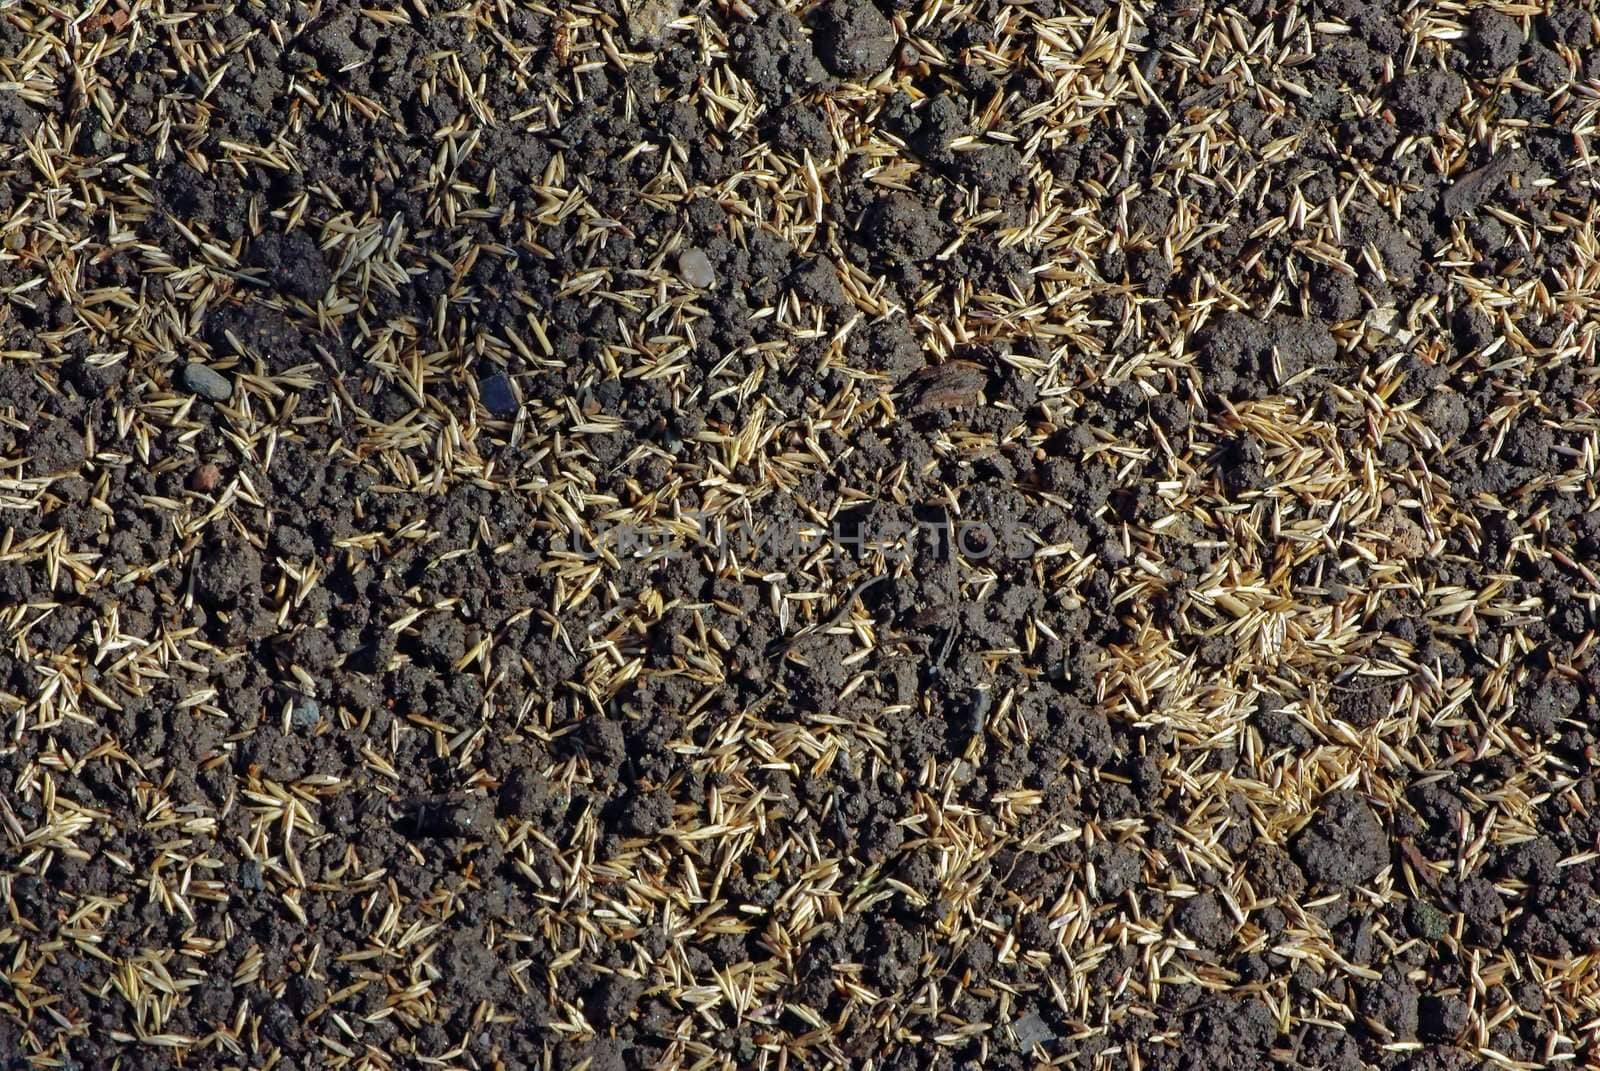 Seeds of lawn grass on cultivated soil